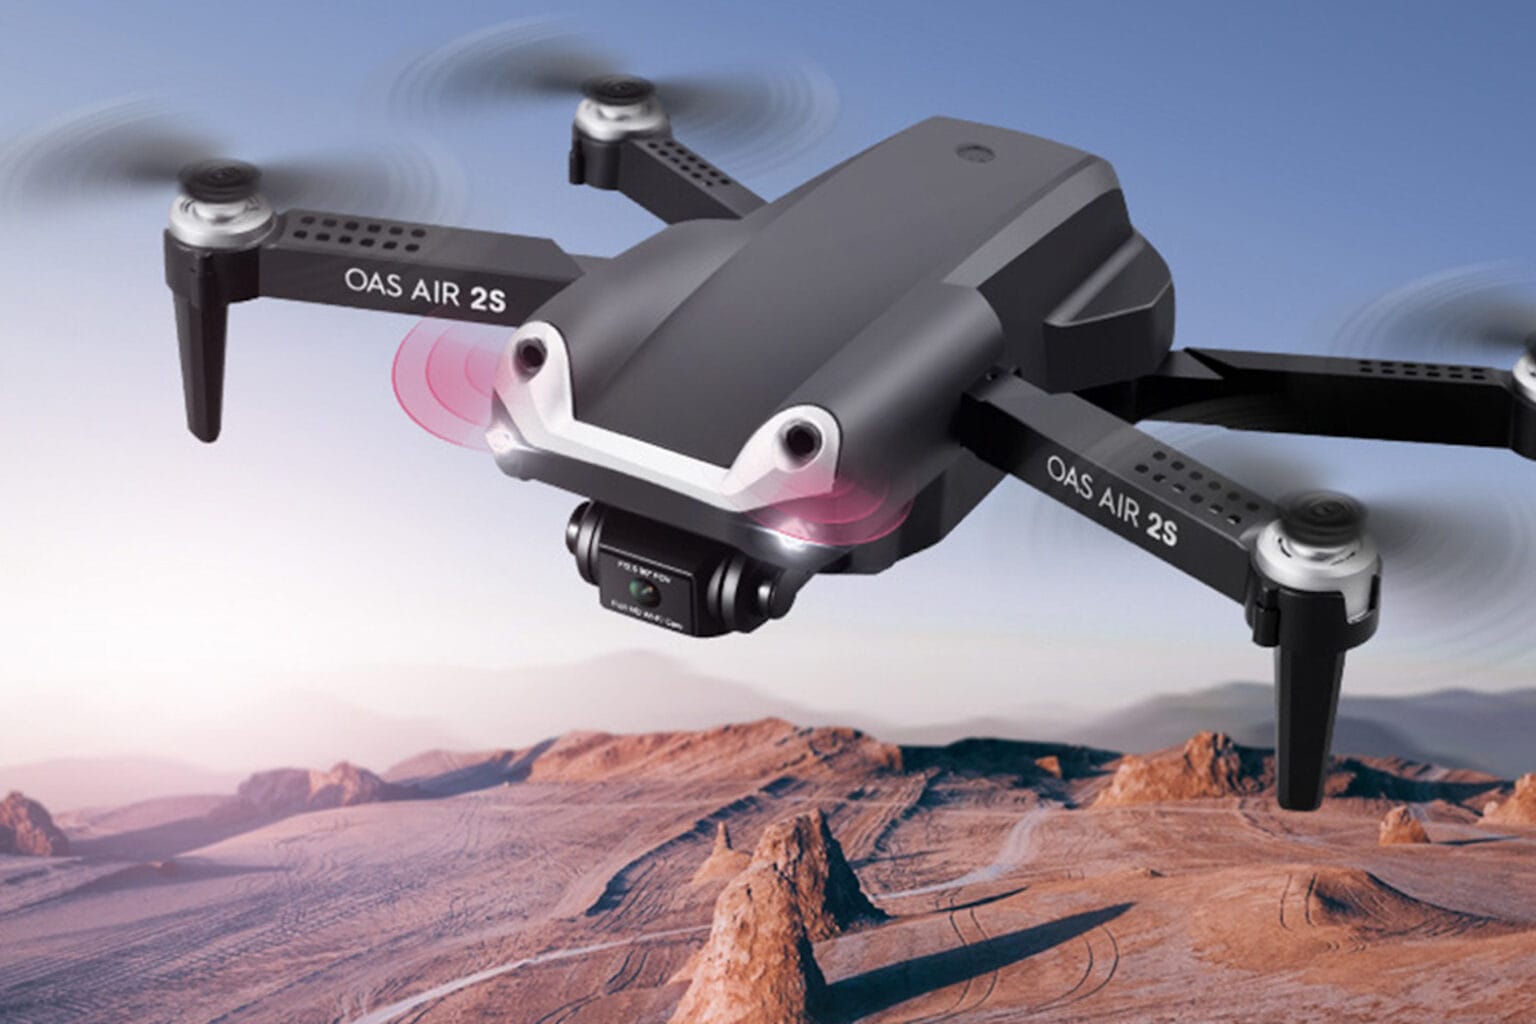 Take off with this foldable 4K camera drone for $69.97.